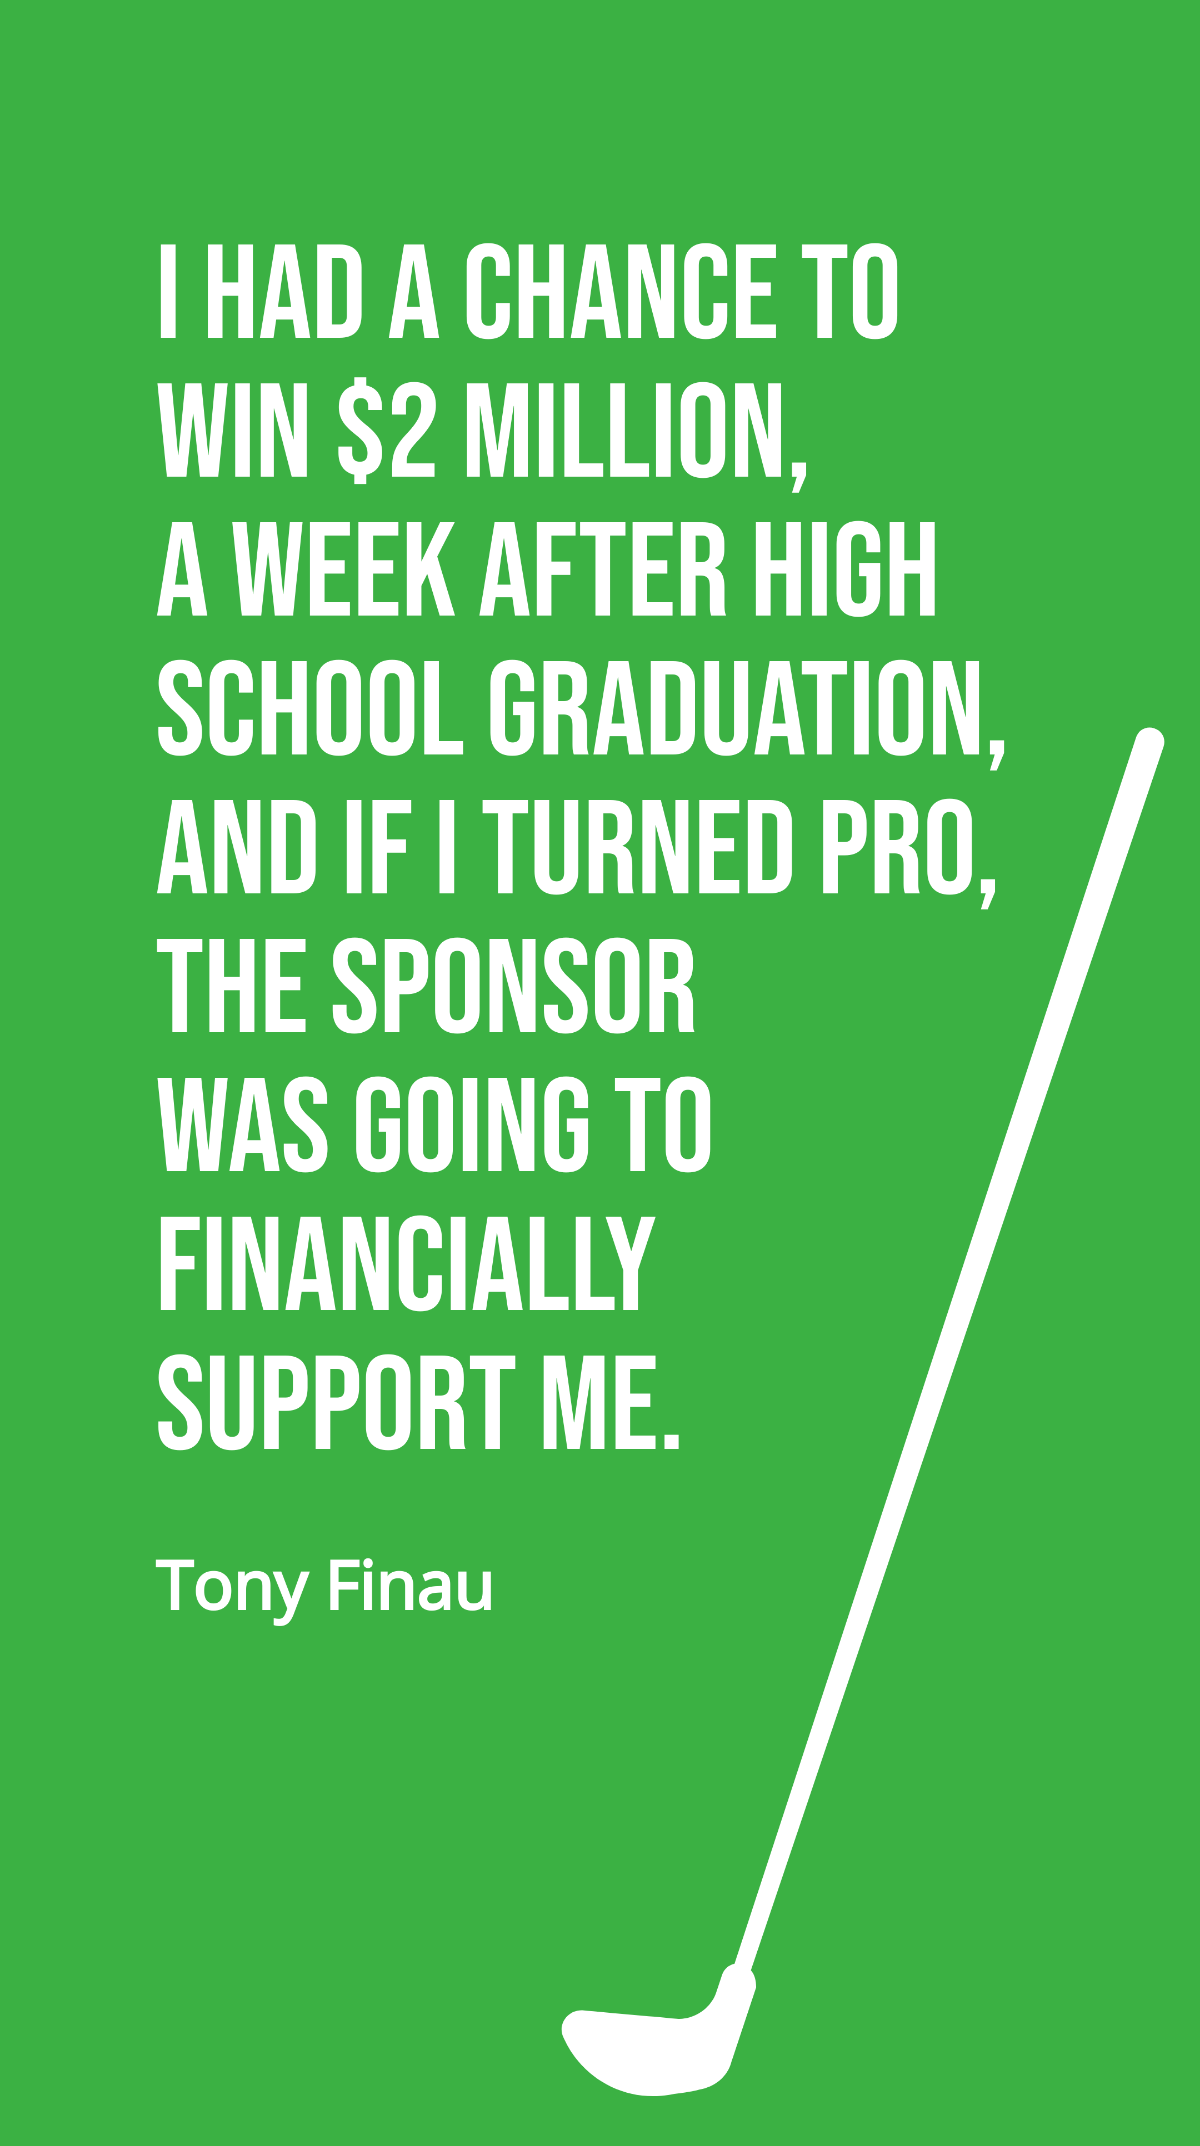 Tony Finau - I had a chance to win $2 million, a week after high school graduation, and if I turned pro, the sponsor was going to financially support me.